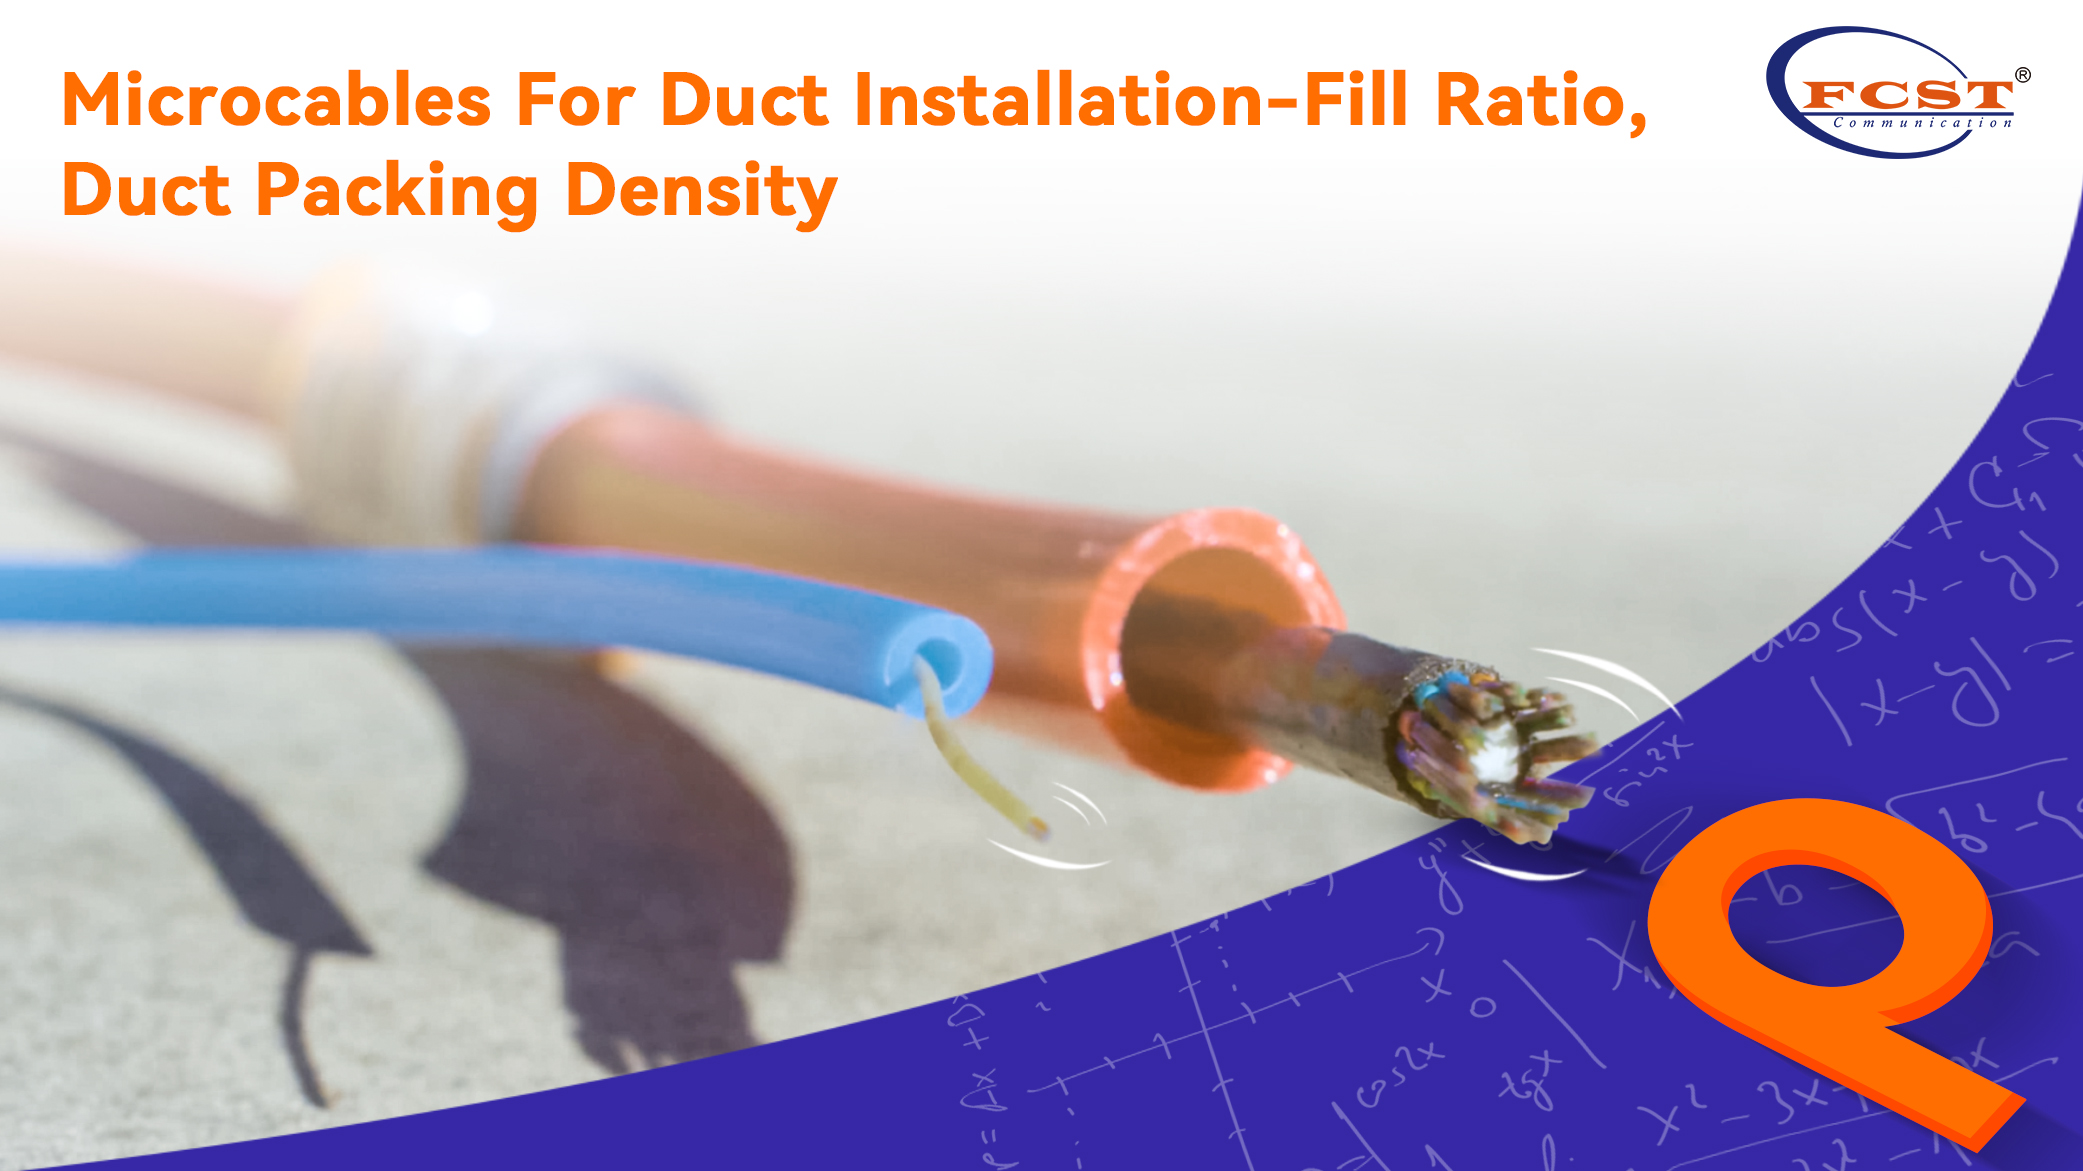 Microcables For Duct Installation-Fill Ratio, Duct Packing Density